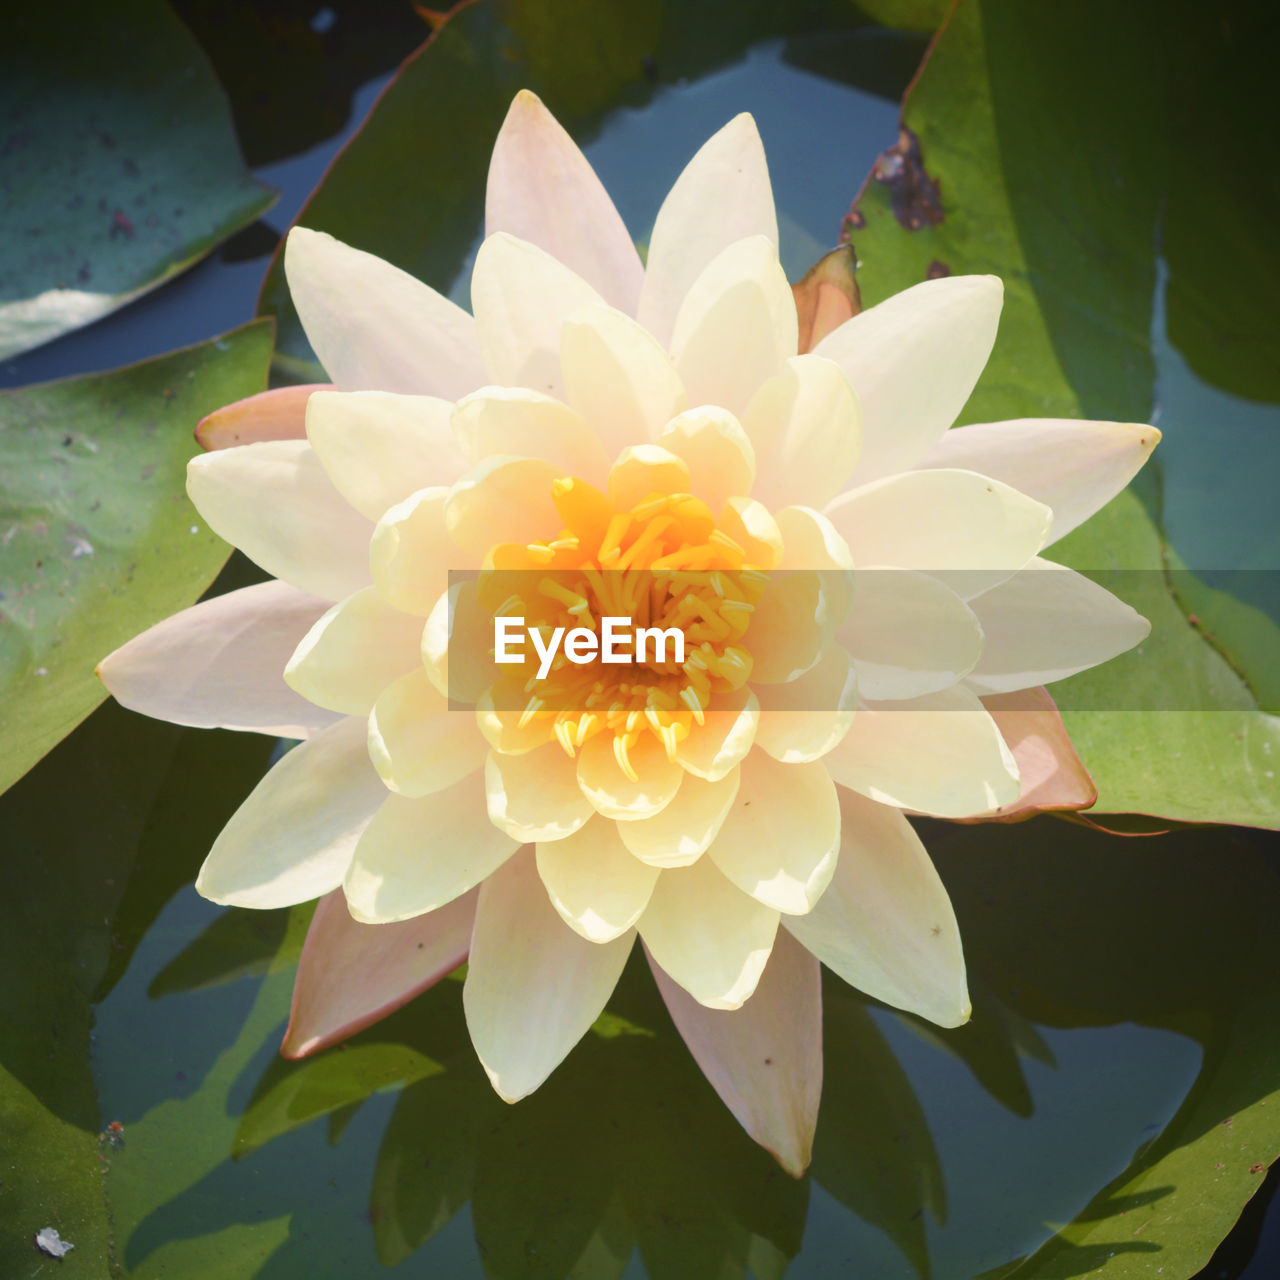 Beautiful lotus in the water Beauty In Nature Close-up Flower Flower Head Flowering Plant Fragility Freshness Growth Inflorescence Lake Leaf Lotus Water Lily Nature No People Petal Plant Plant Part Pollen Vulnerability  Water Water Lily